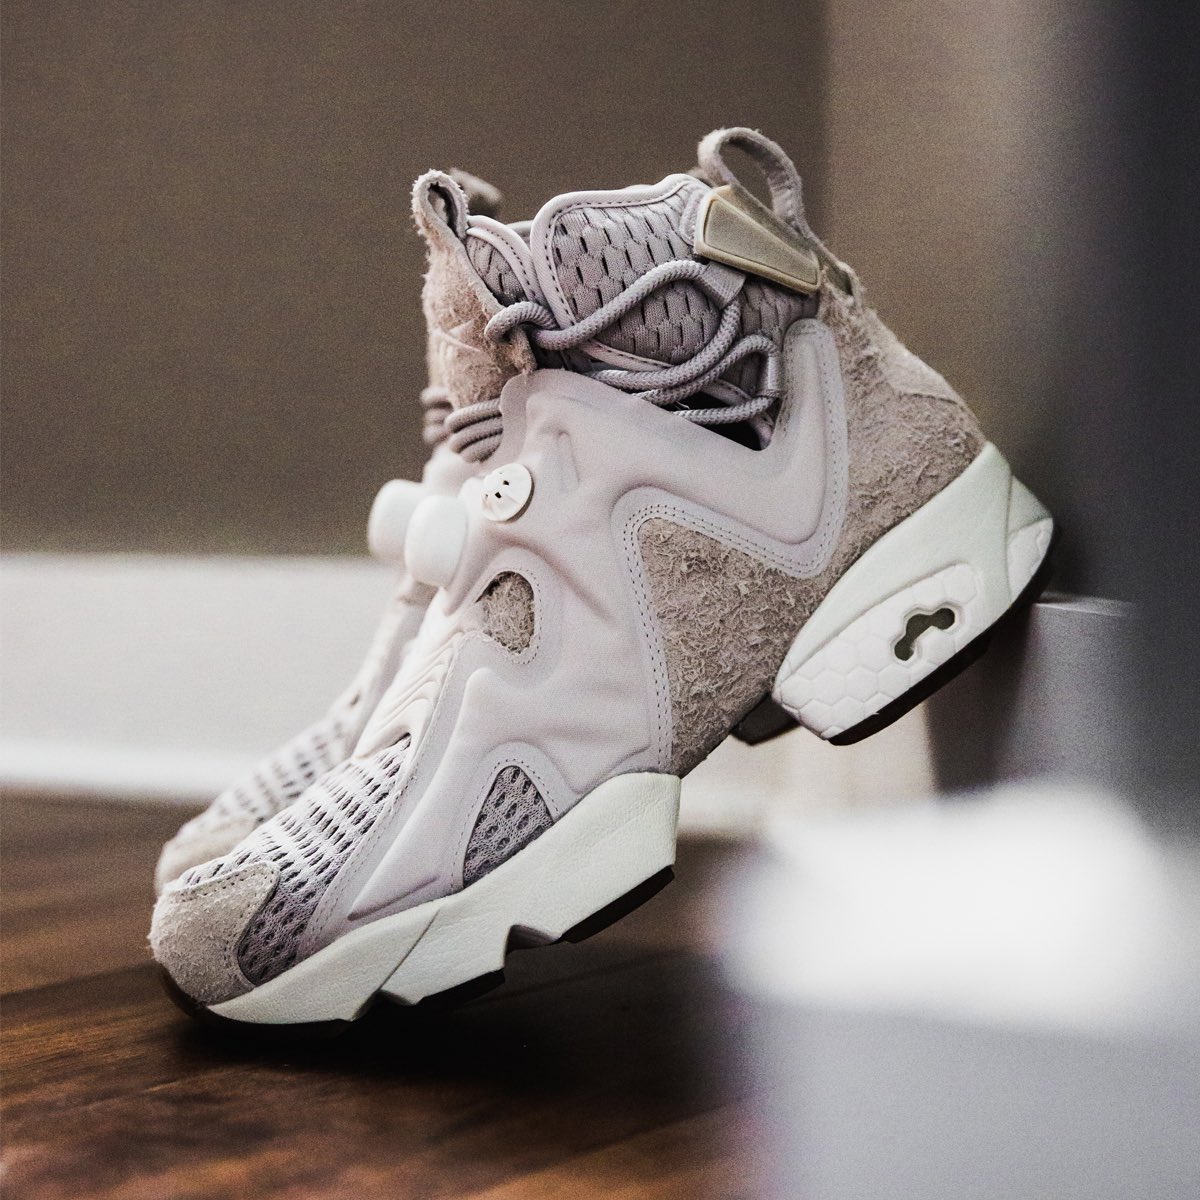 Efterforskning ønske Ansvarlige person atmos USA on Twitter: "Reebok “Furikaze Future”, the first signature shoe  from, ATL-based rapper, Future. Its a hybrid of the Reebok Instapump Fury  and the Reebok Kamikaze. The Furikaze Future will be